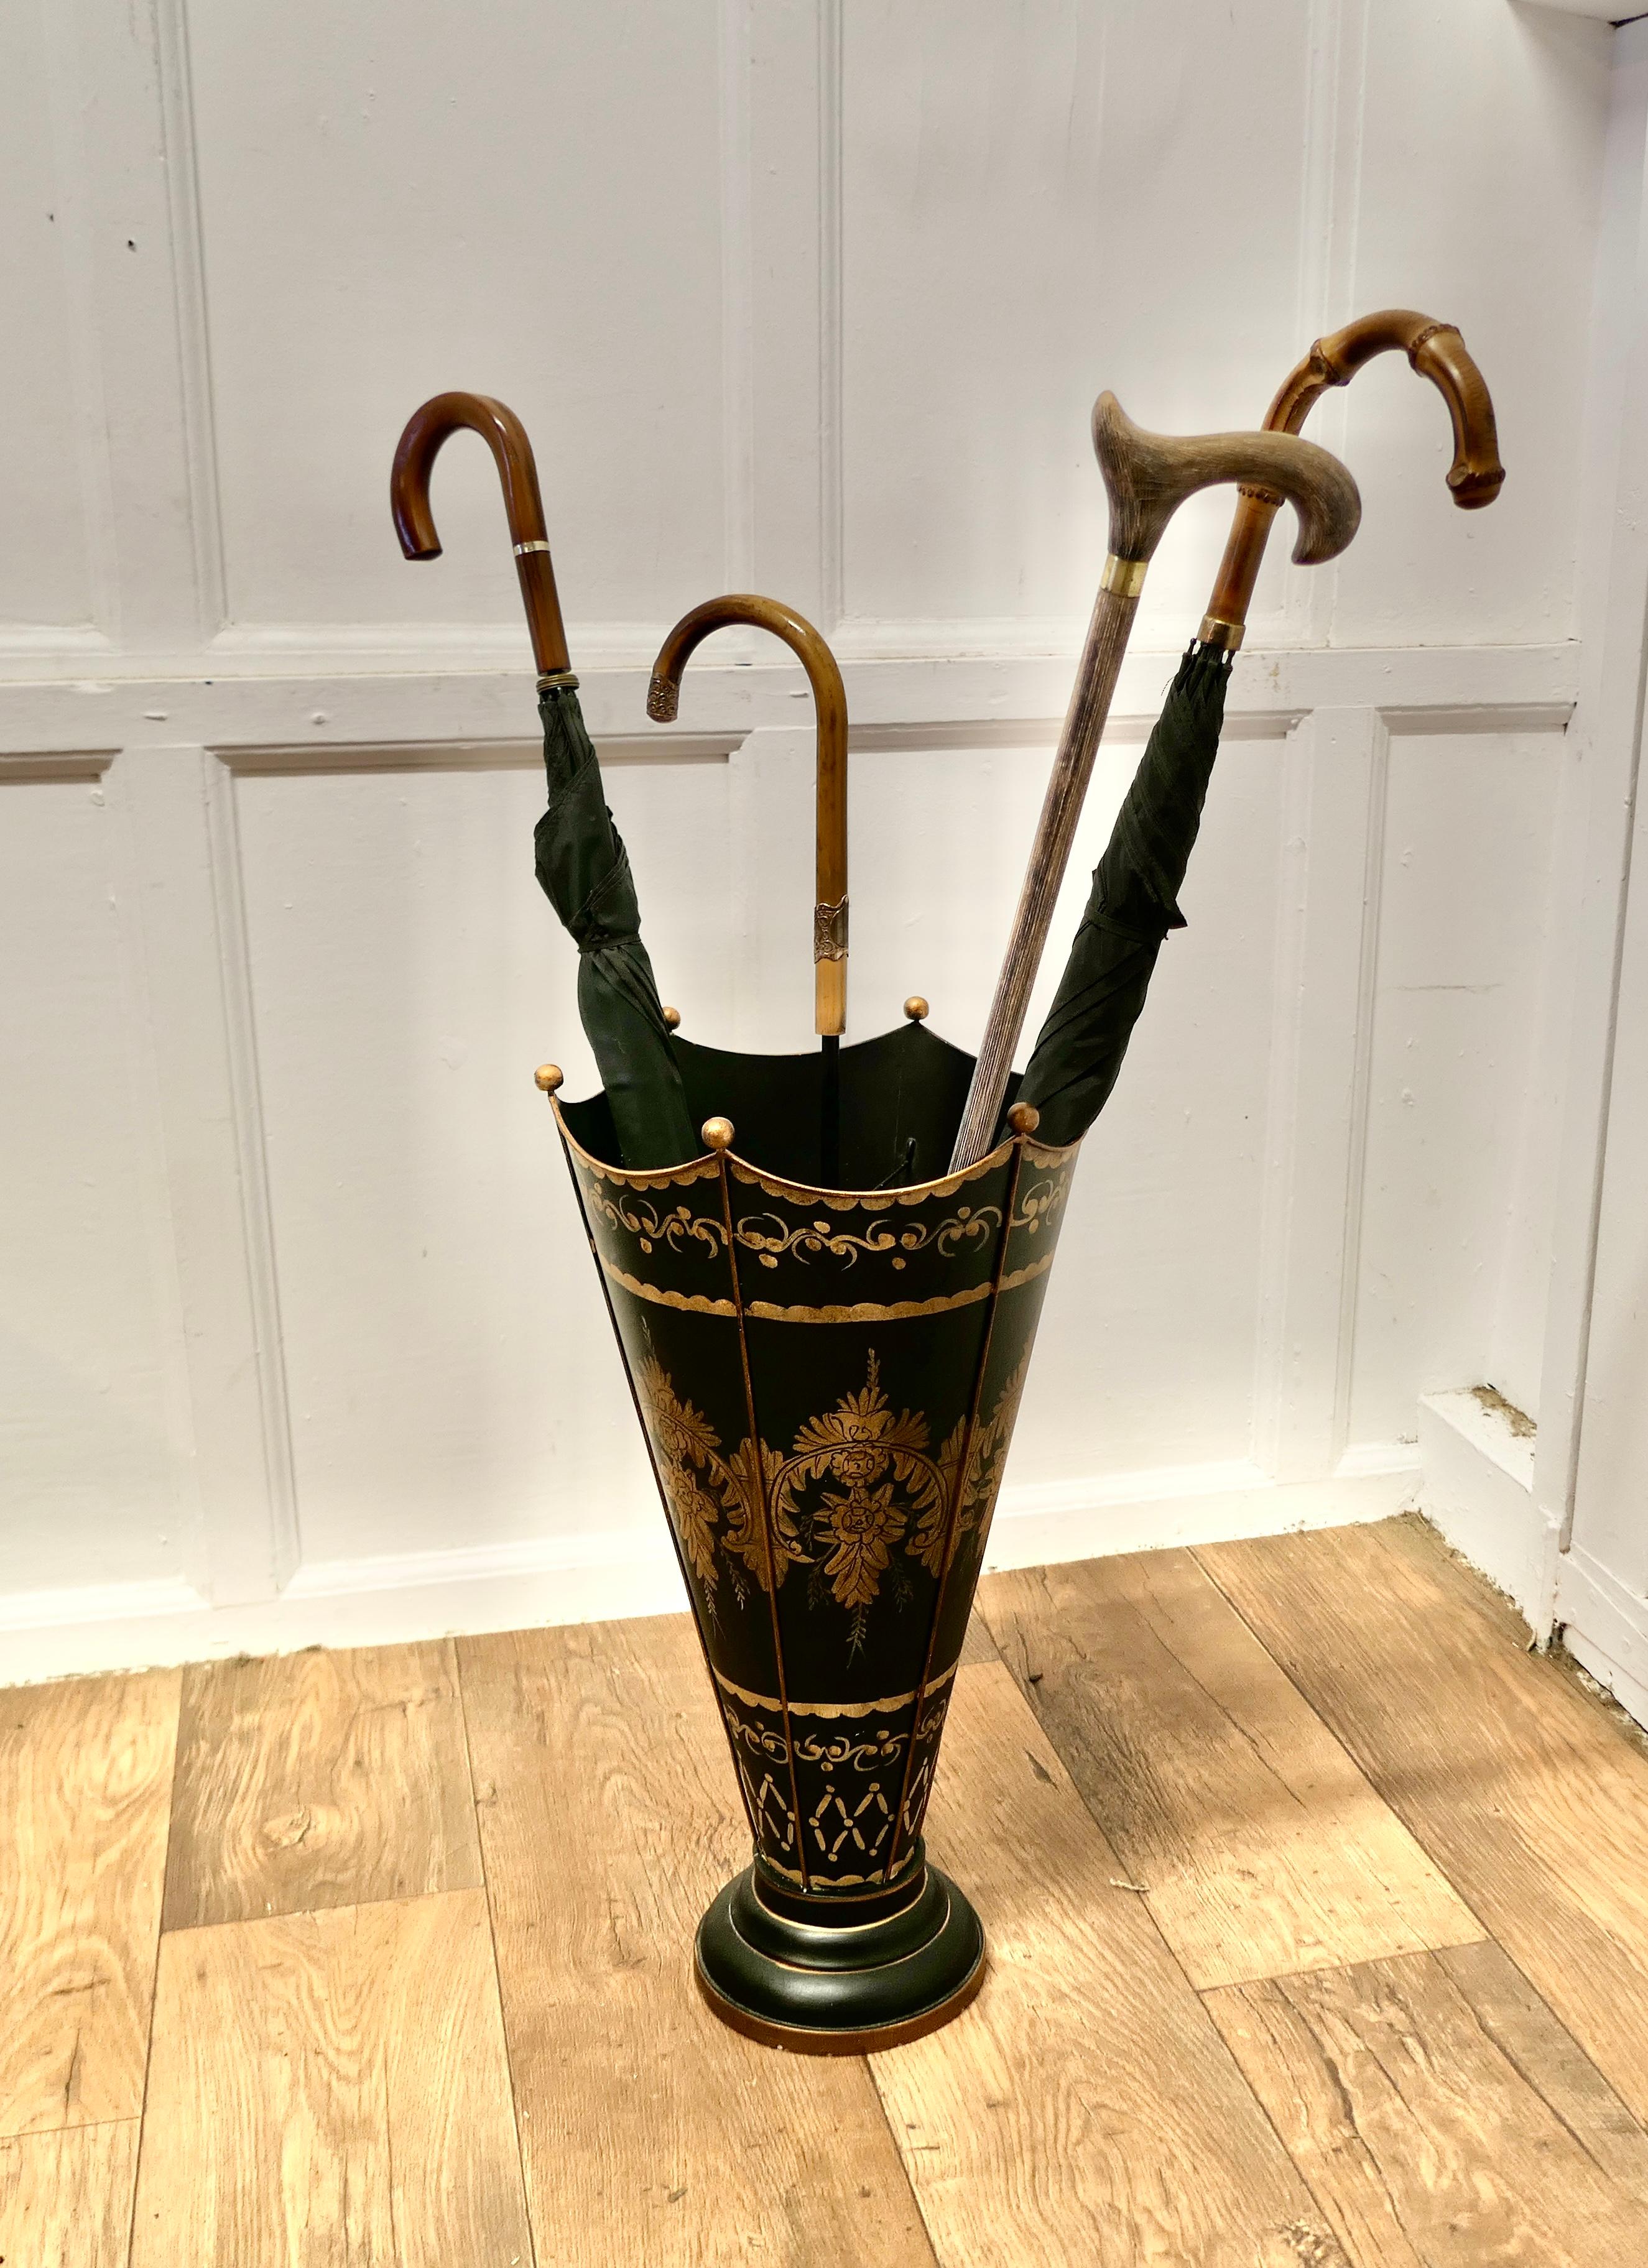 A Superb Italian Toleware Umbrella Stand, Hand Painted Gold on Black

A very unusual and attractive piece, hand painted and made in Tolewear, it is decorated with garlands of leaves
The stand is divided into 6 sections and has an elegant cane handle